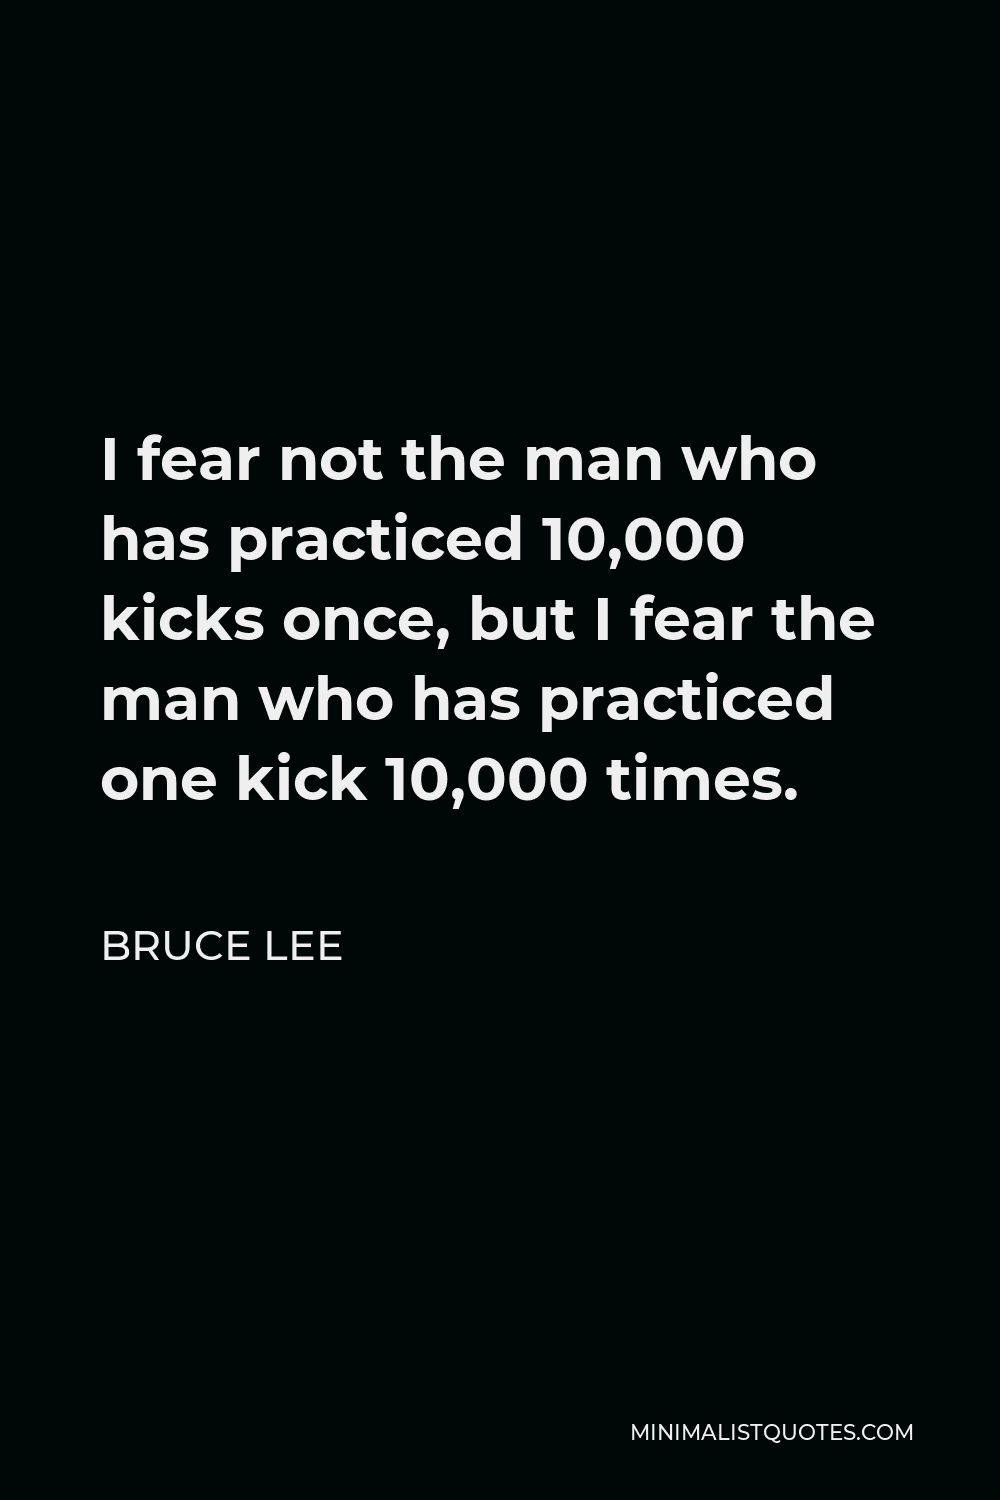 Bruce Lee Quote: I fear not the man who has practiced 10,000 kicks once,  but I fear the man who has practiced one kick 10,000 times.